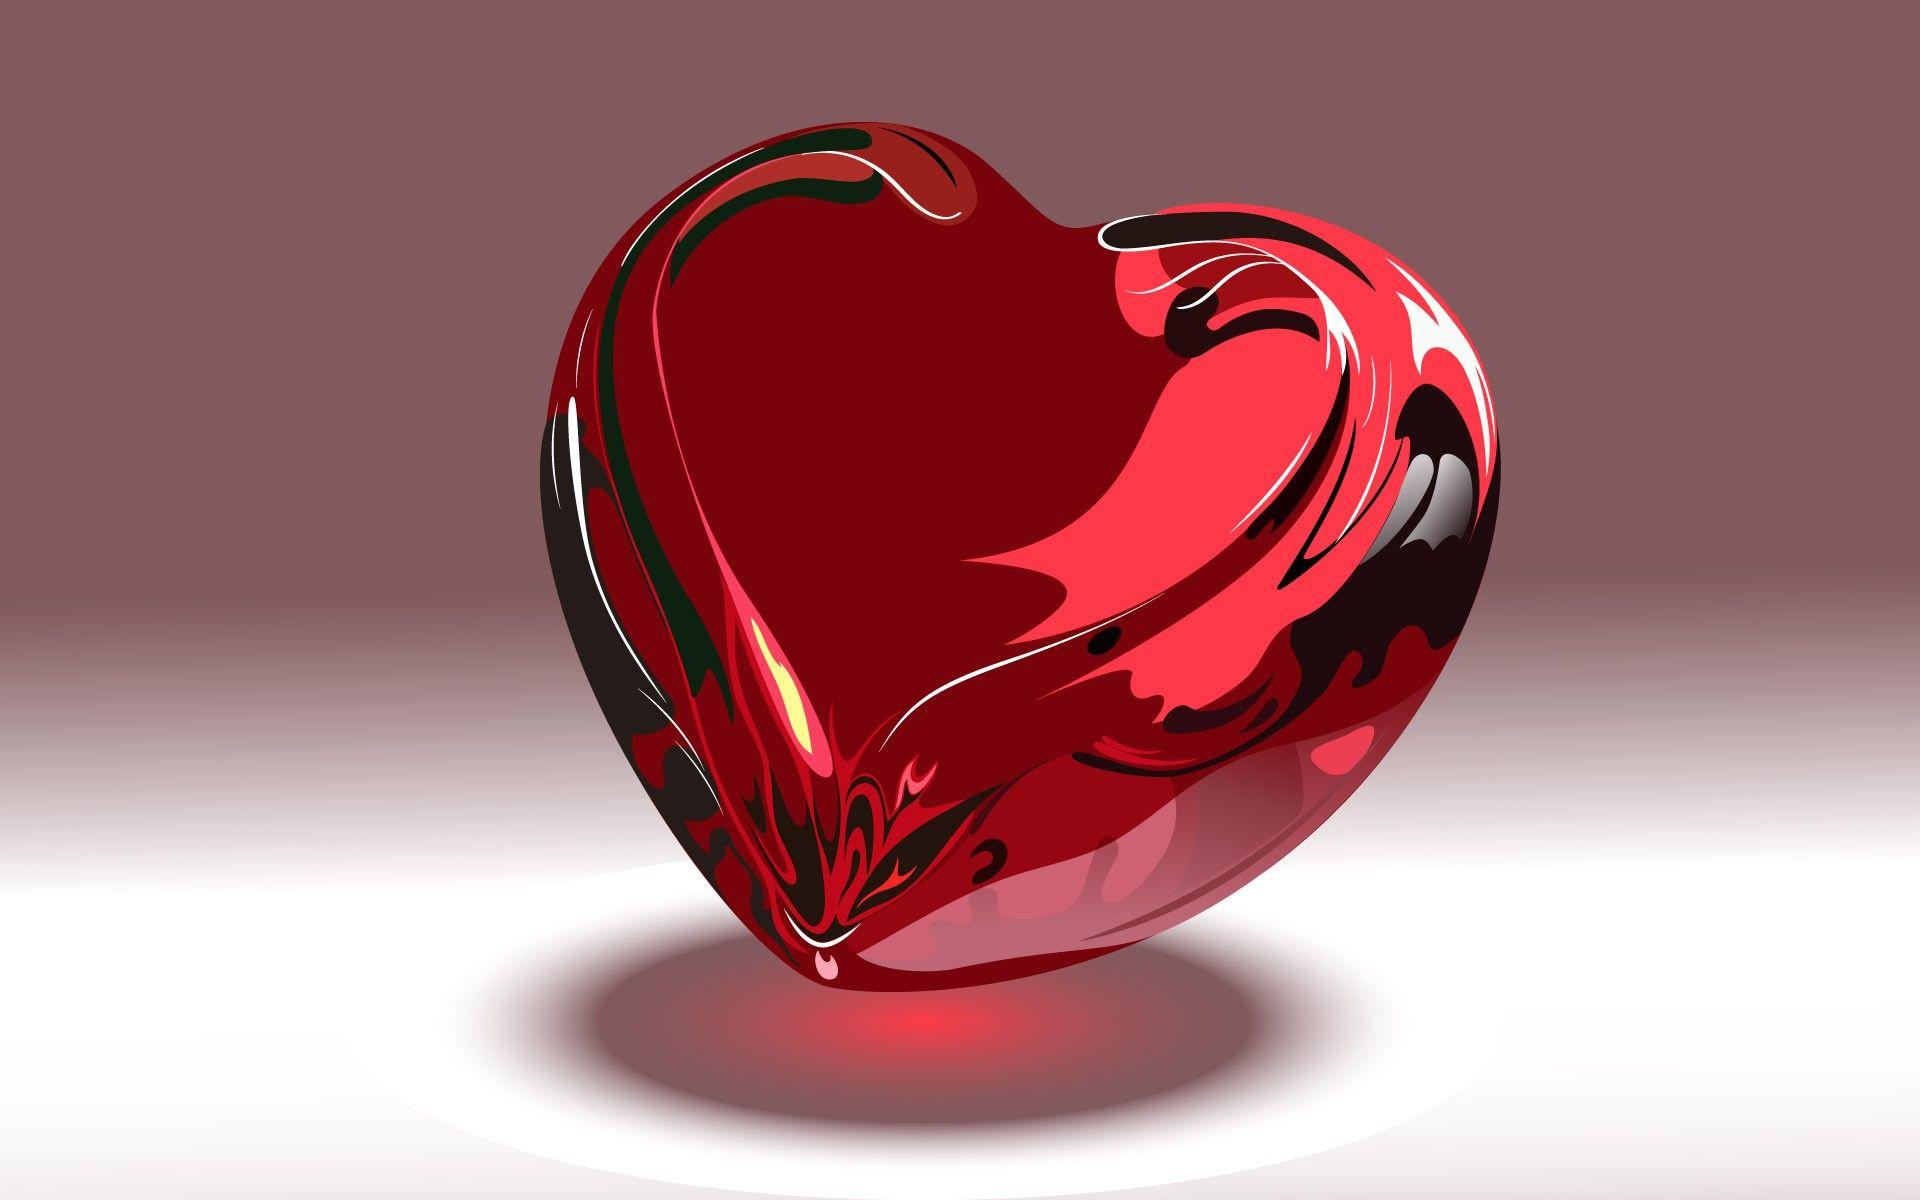 Image for Hd Wallpapers 3d Love Heart 150778 Image